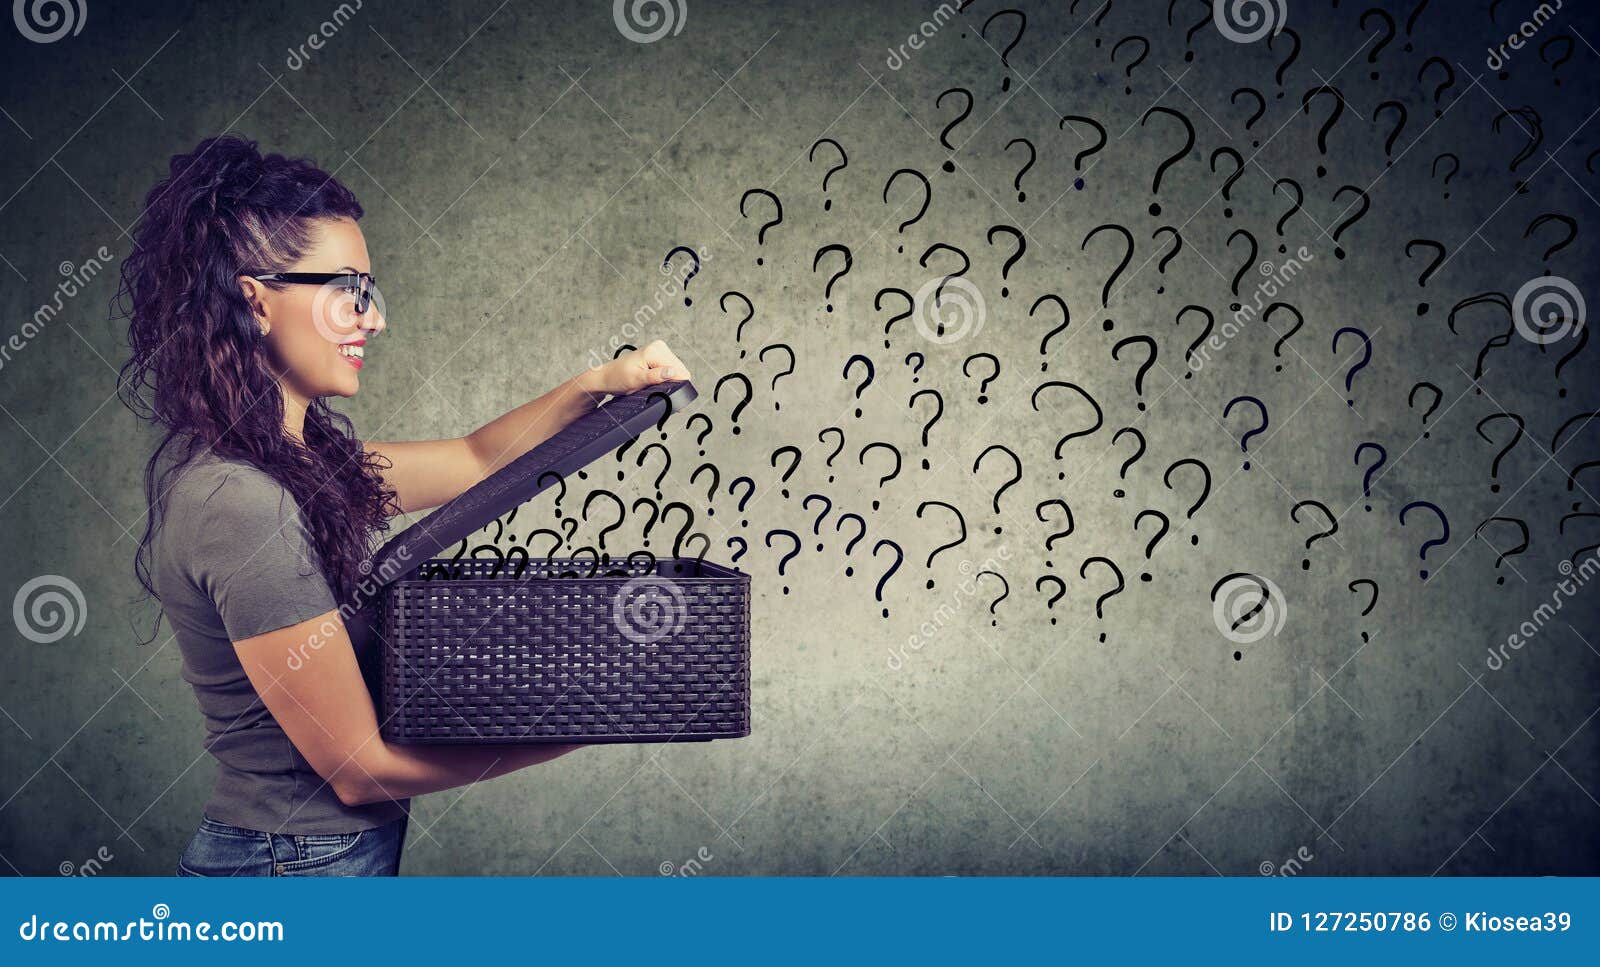 woman with many questions looking for an answer